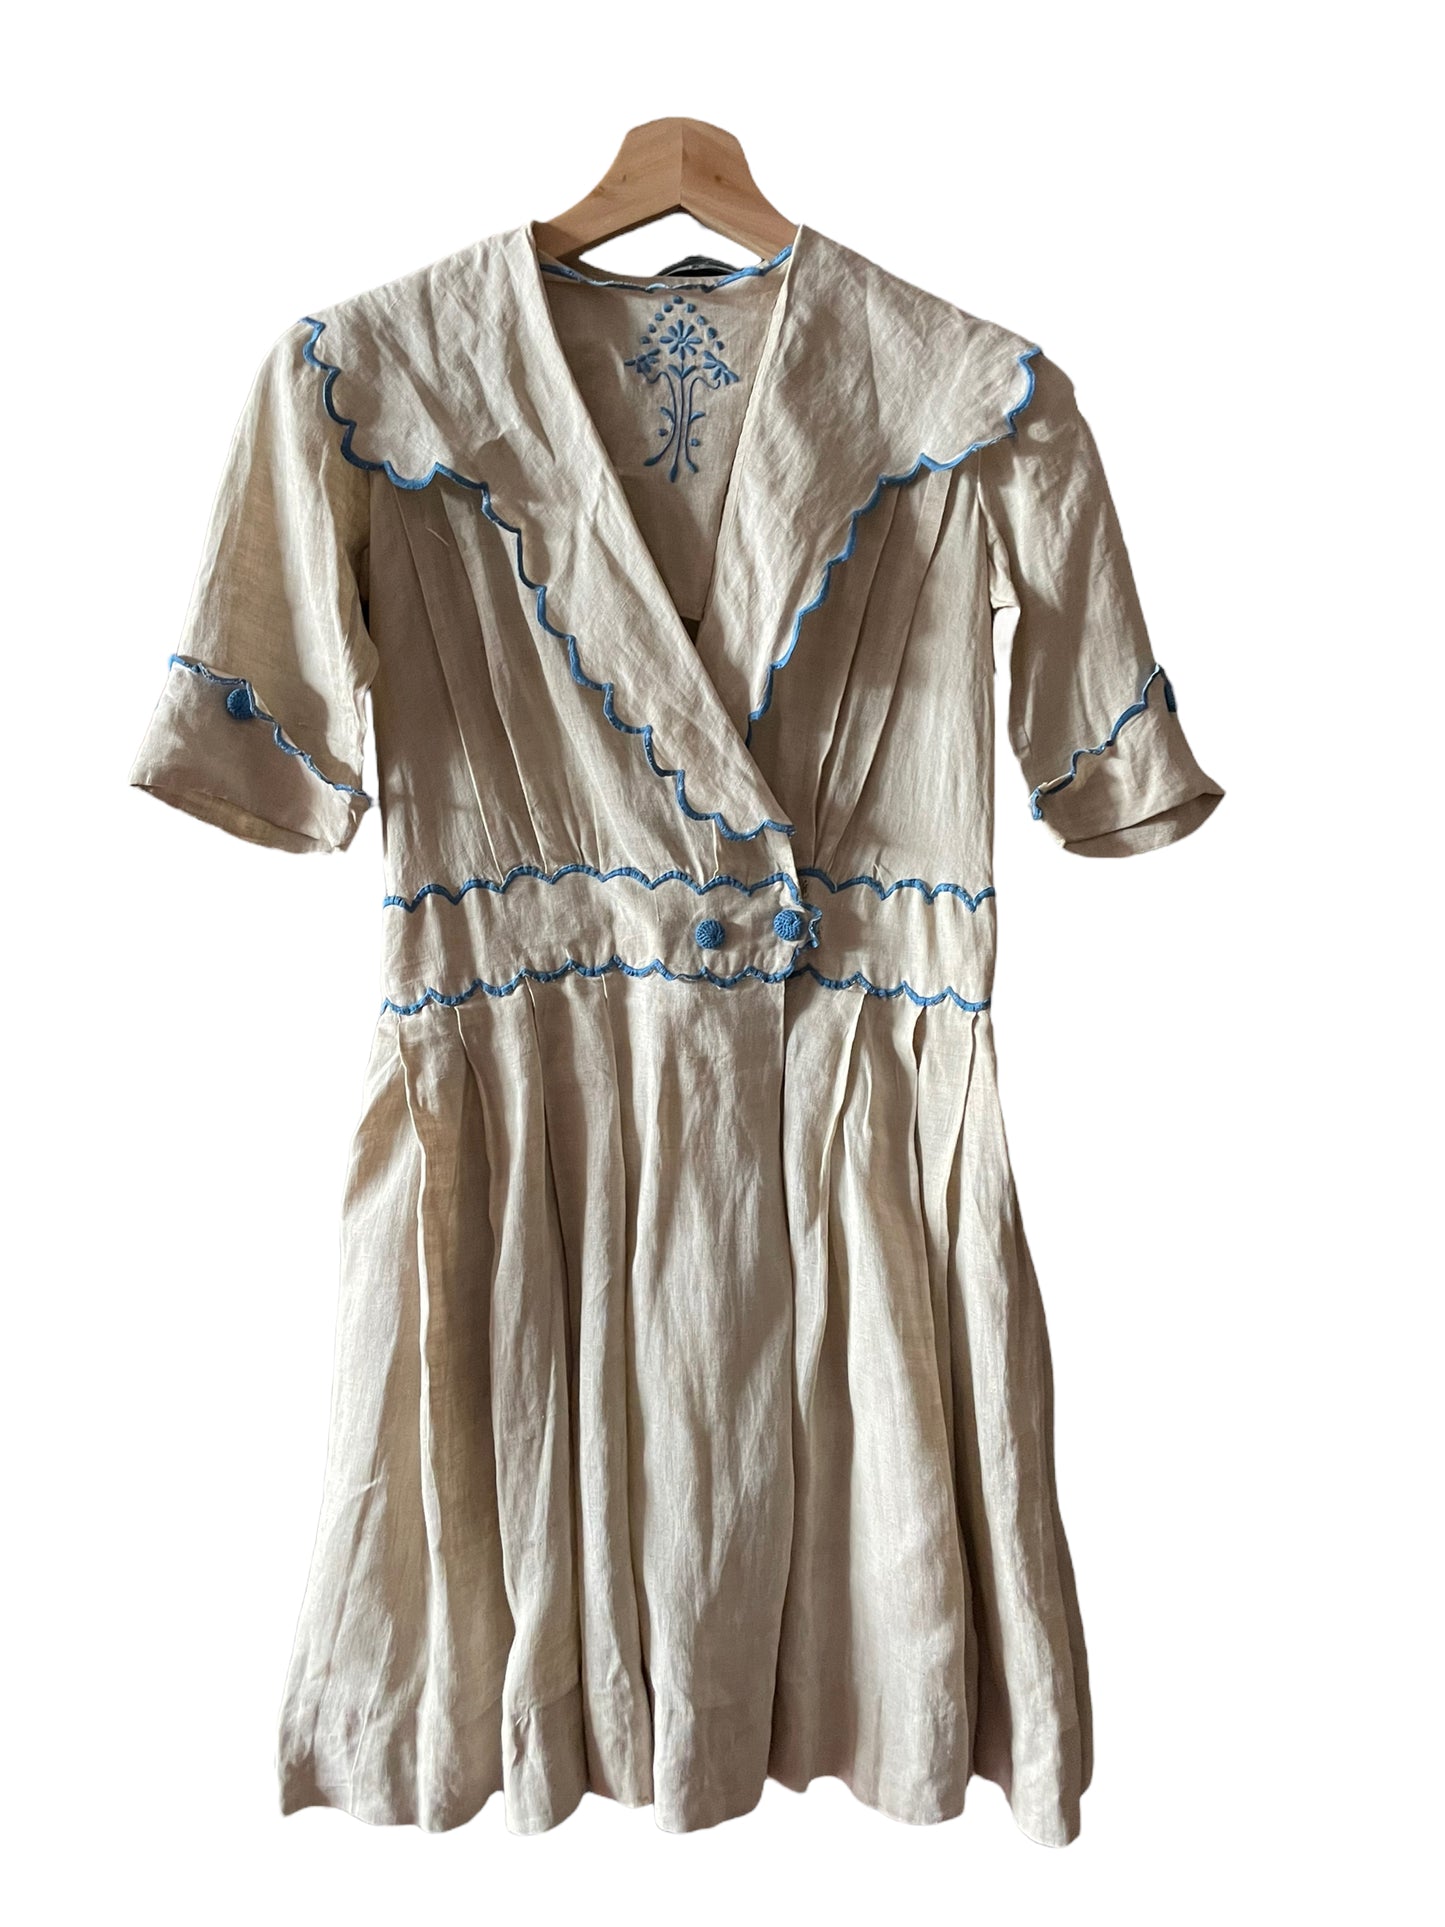 Full front view of Antique Early 1900s Linen Dress SZ XS